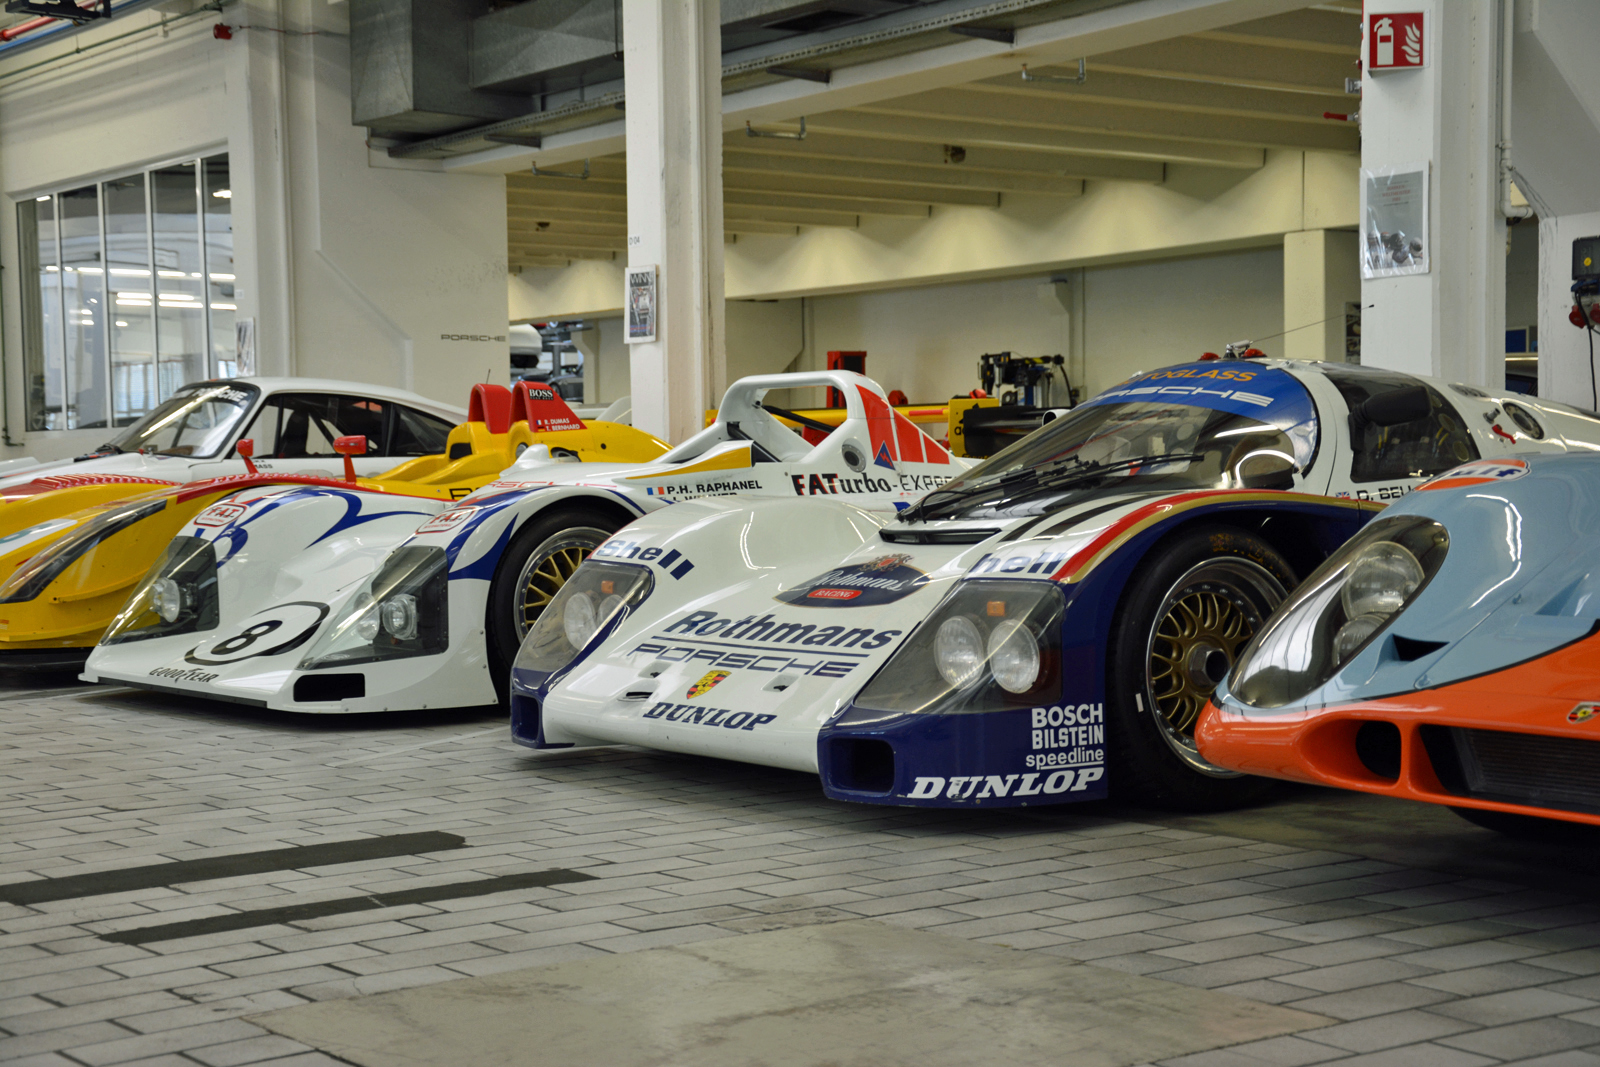 <p>Porsche goes to great lengths to leave its race cars as original as possible. The team’s goal is to keep the cars in the condition they were in <strong>when they crossed the finish line</strong> weeks, years or decades ago. Some of the Le Mans cars in the collection have never been washed. Klein joked we could count the insects that lost their lives on the windshield during each race.</p>